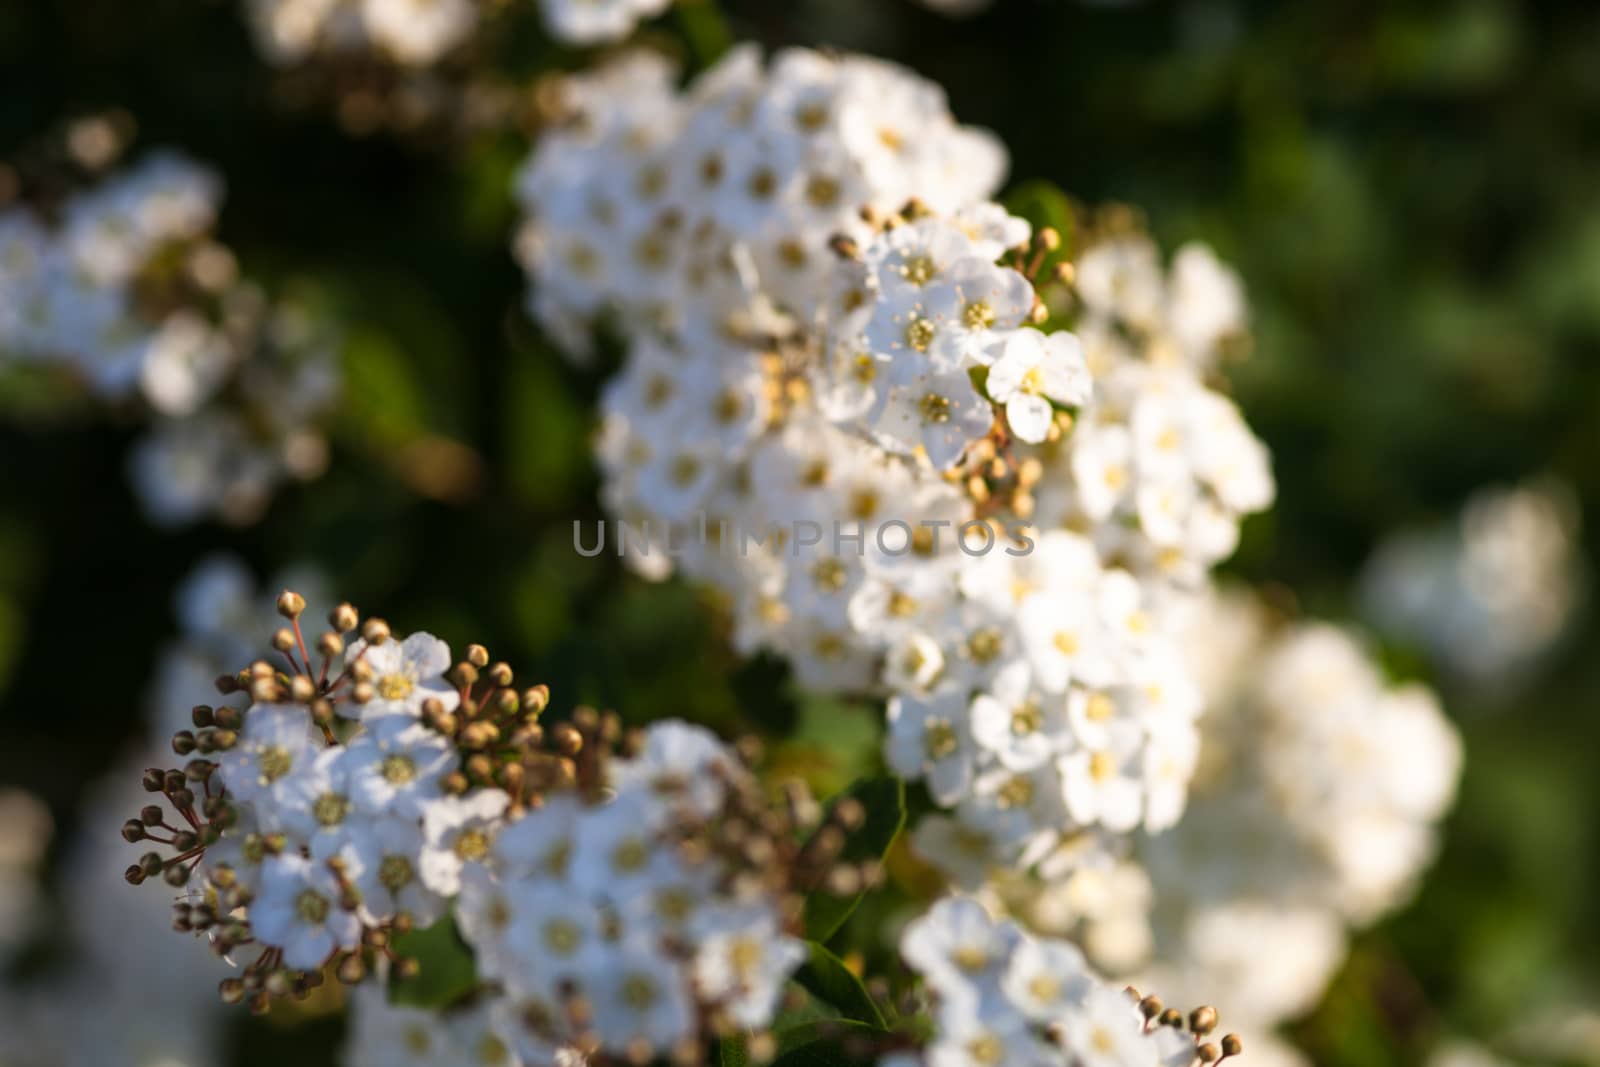 White flowers and buds on the blooming Spiraea shrub